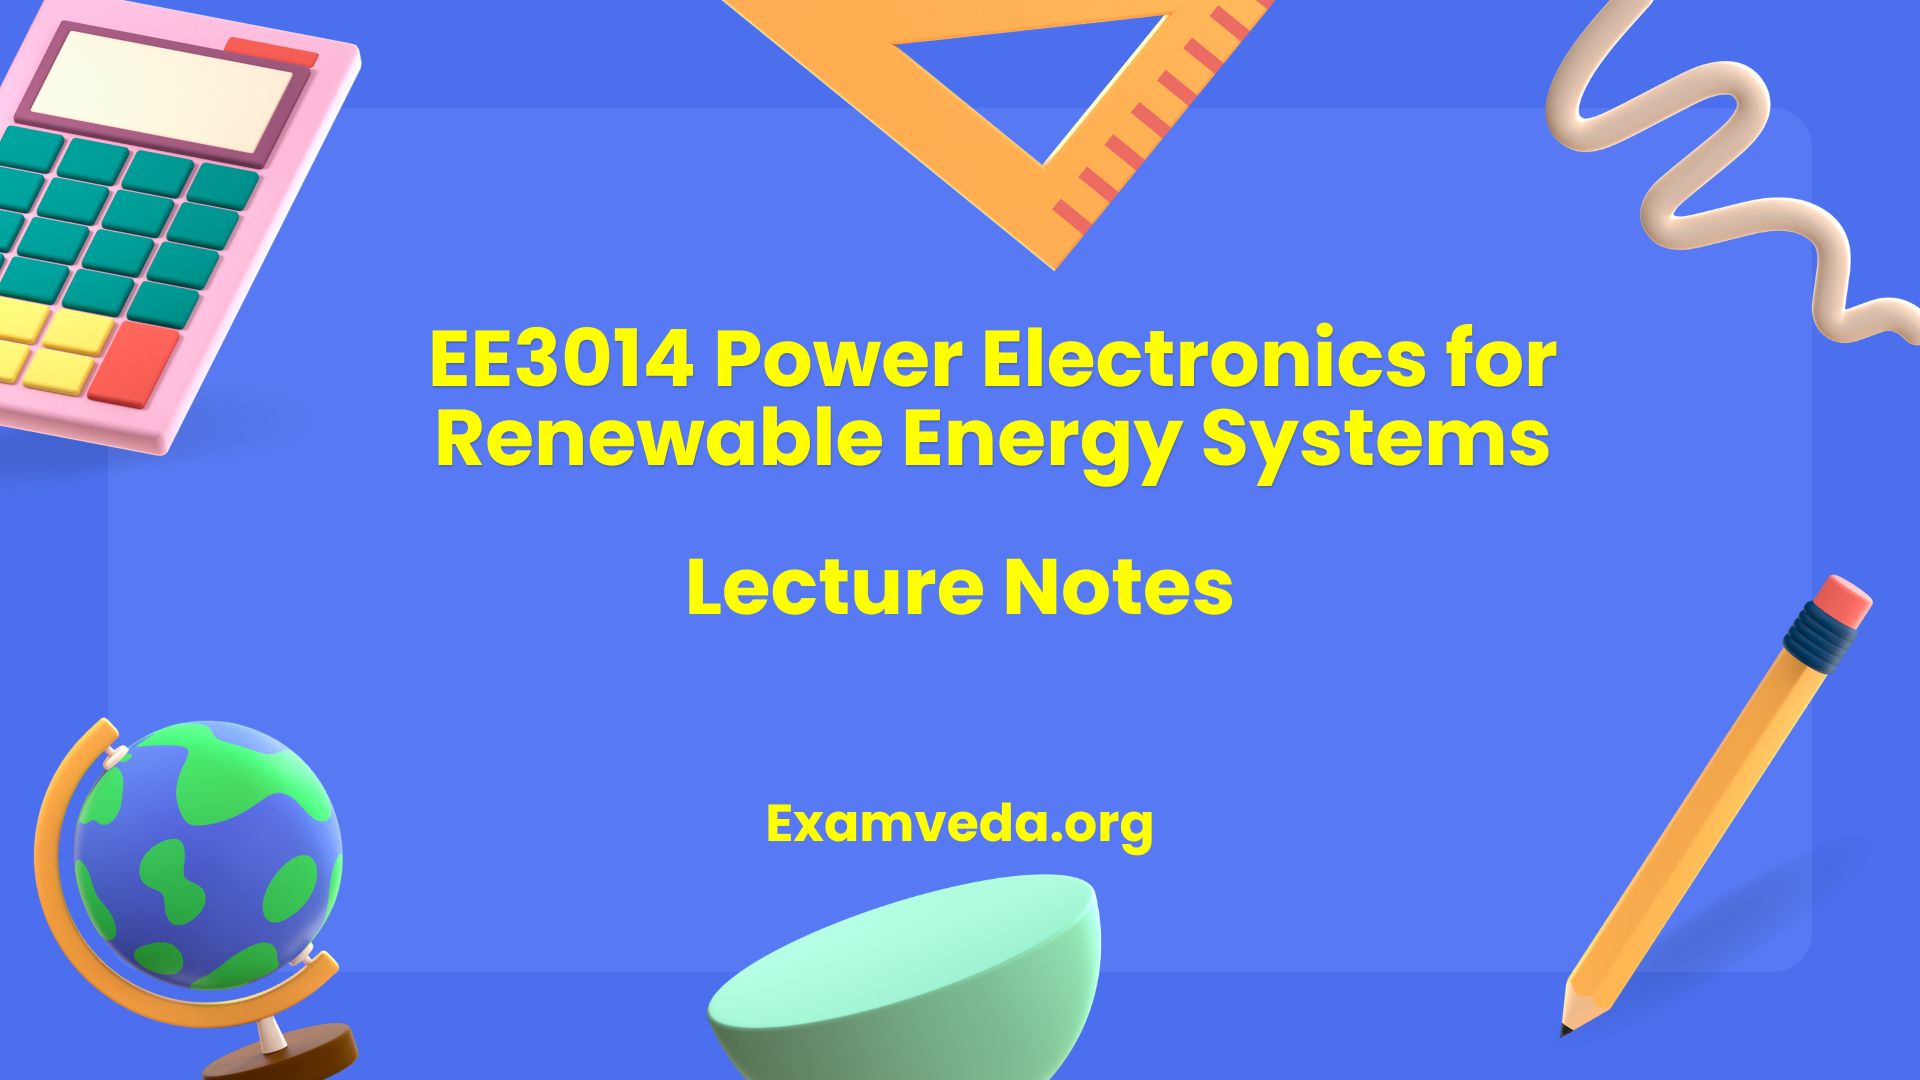 EE3014 Power Electronics for Renewable Energy Systems Lecture Notes